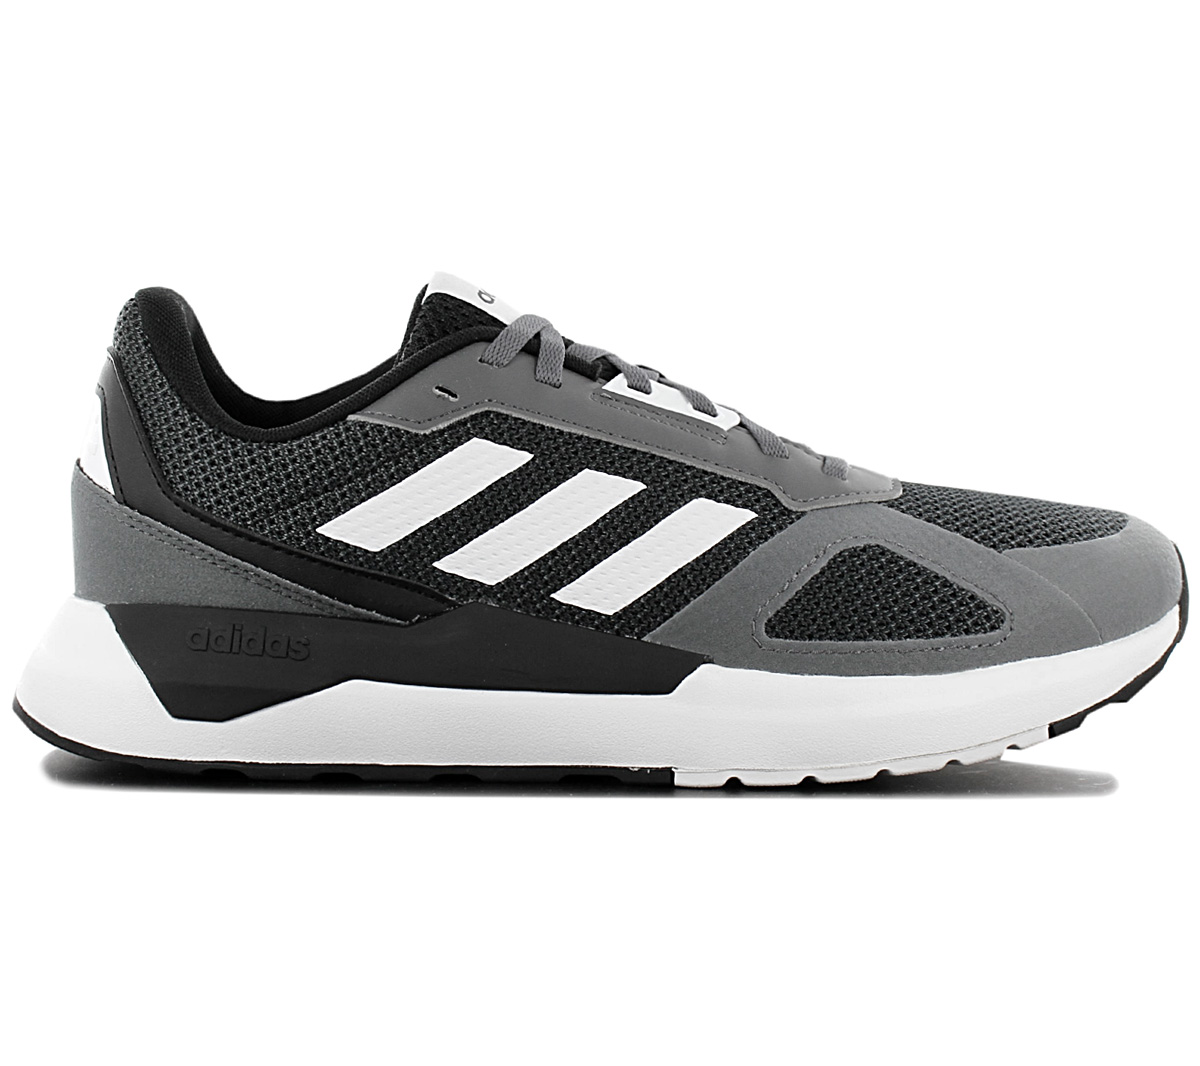 NEW adidas Run 80S BB7435 Men´s Shoes Trainers Sneakers SALE | eBay